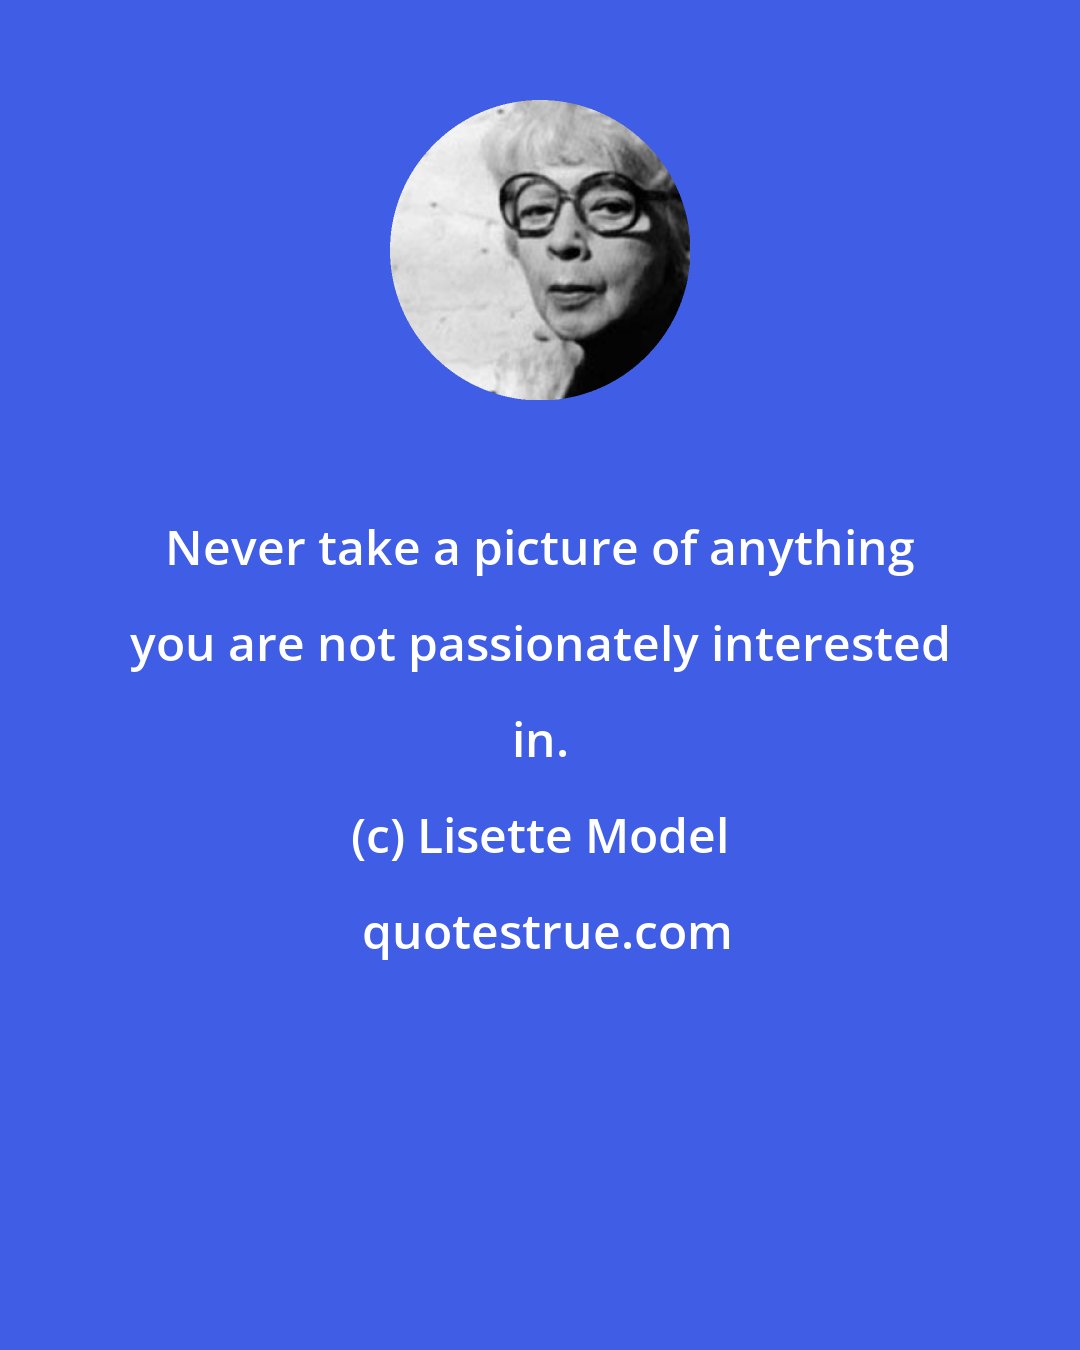 Lisette Model: Never take a picture of anything you are not passionately interested in.